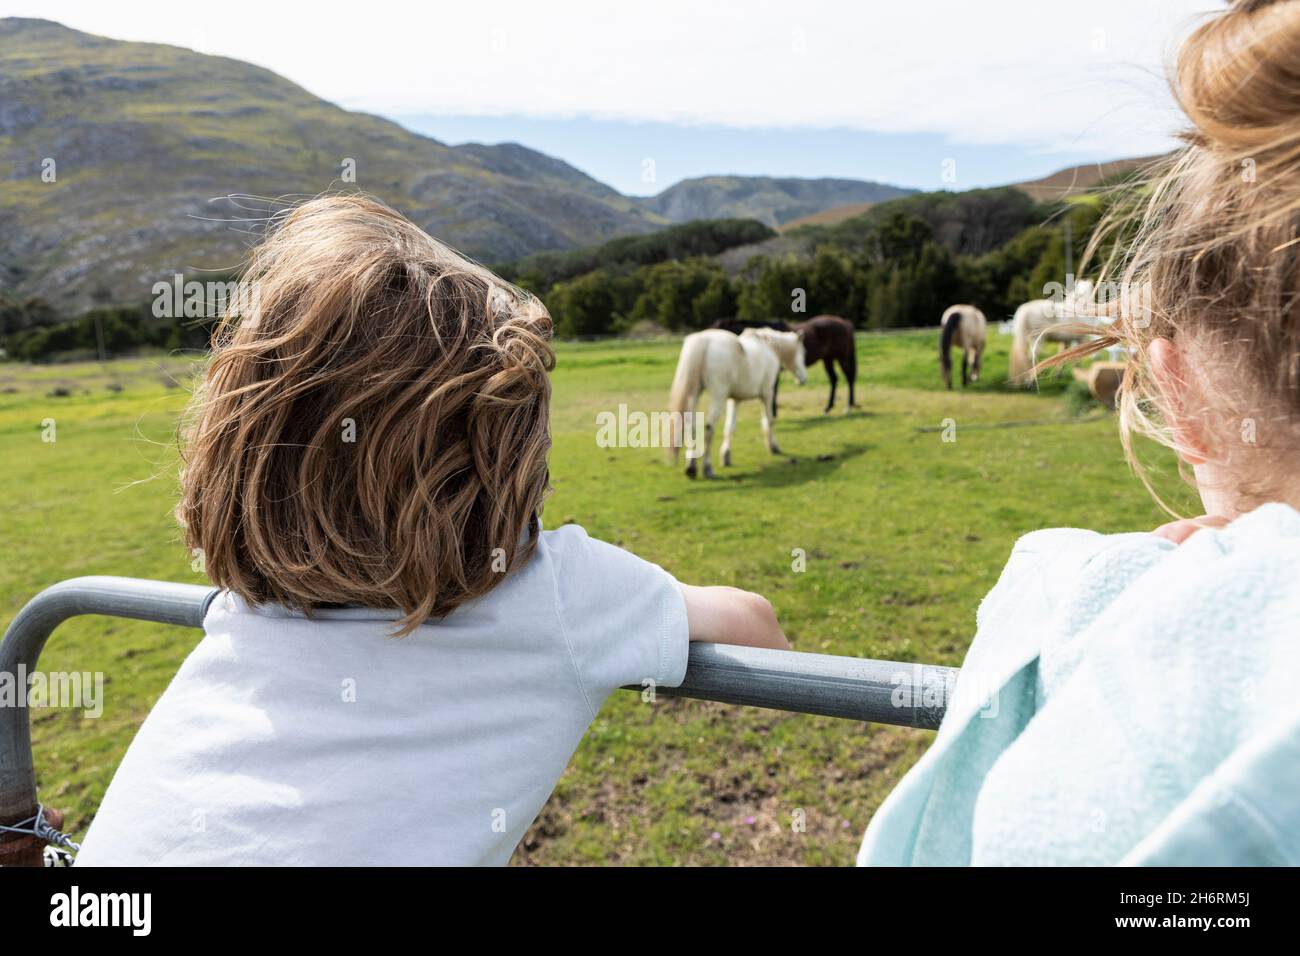 Eight year old boy leaning on a fence, watching horses in a field Stock Photo